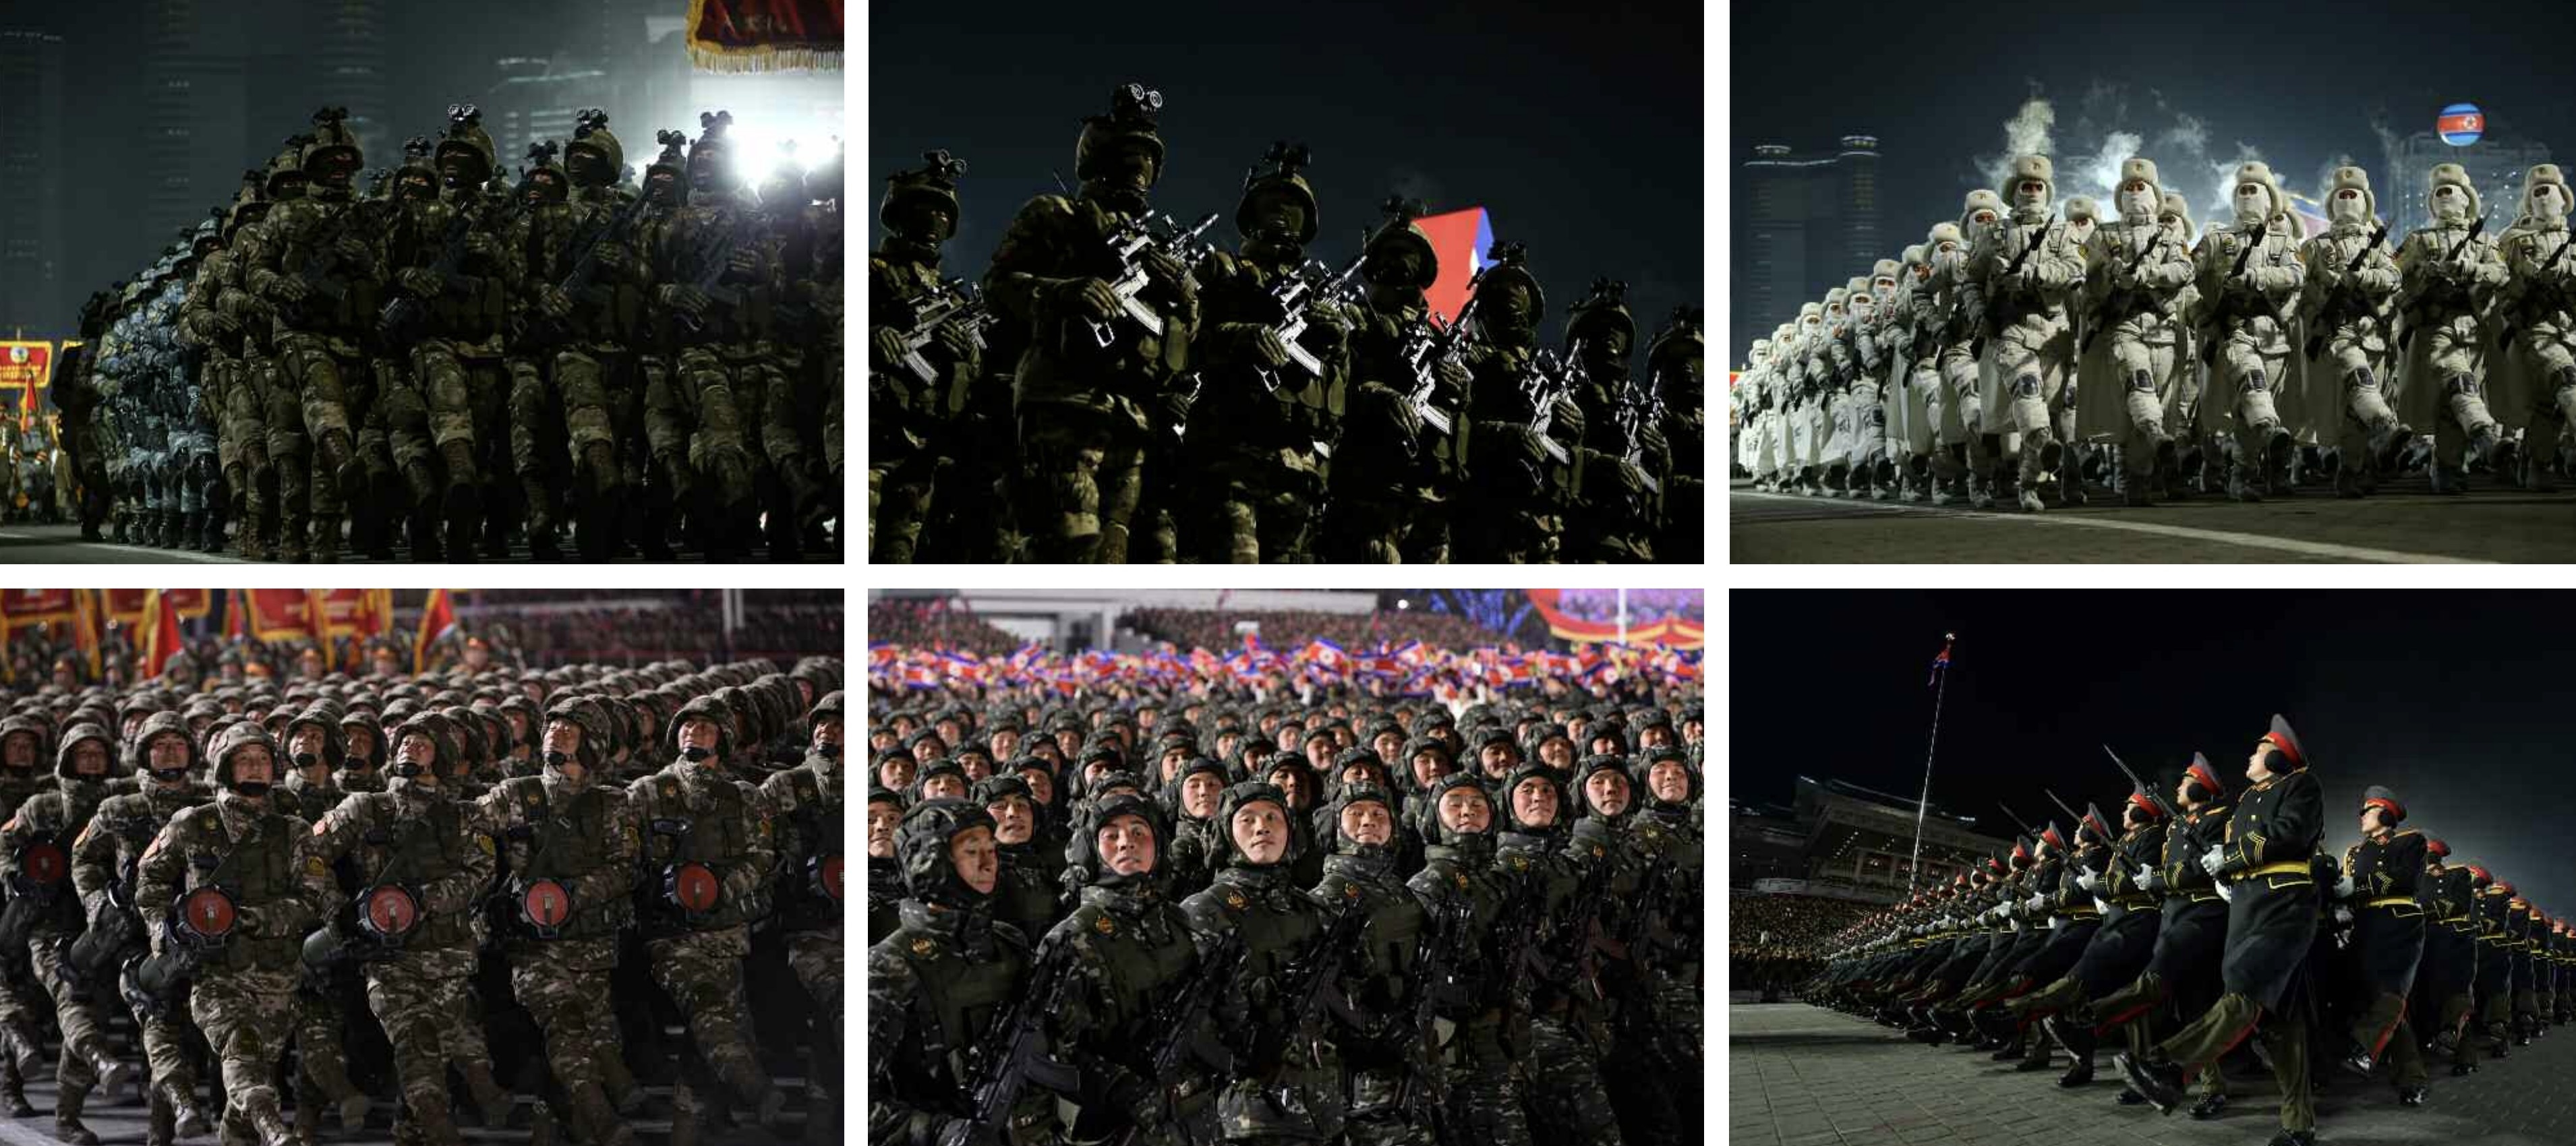 rodong-feb9-2023-kju-military-parade-soldiers-block-formations-uniforms-small-arms.jpg